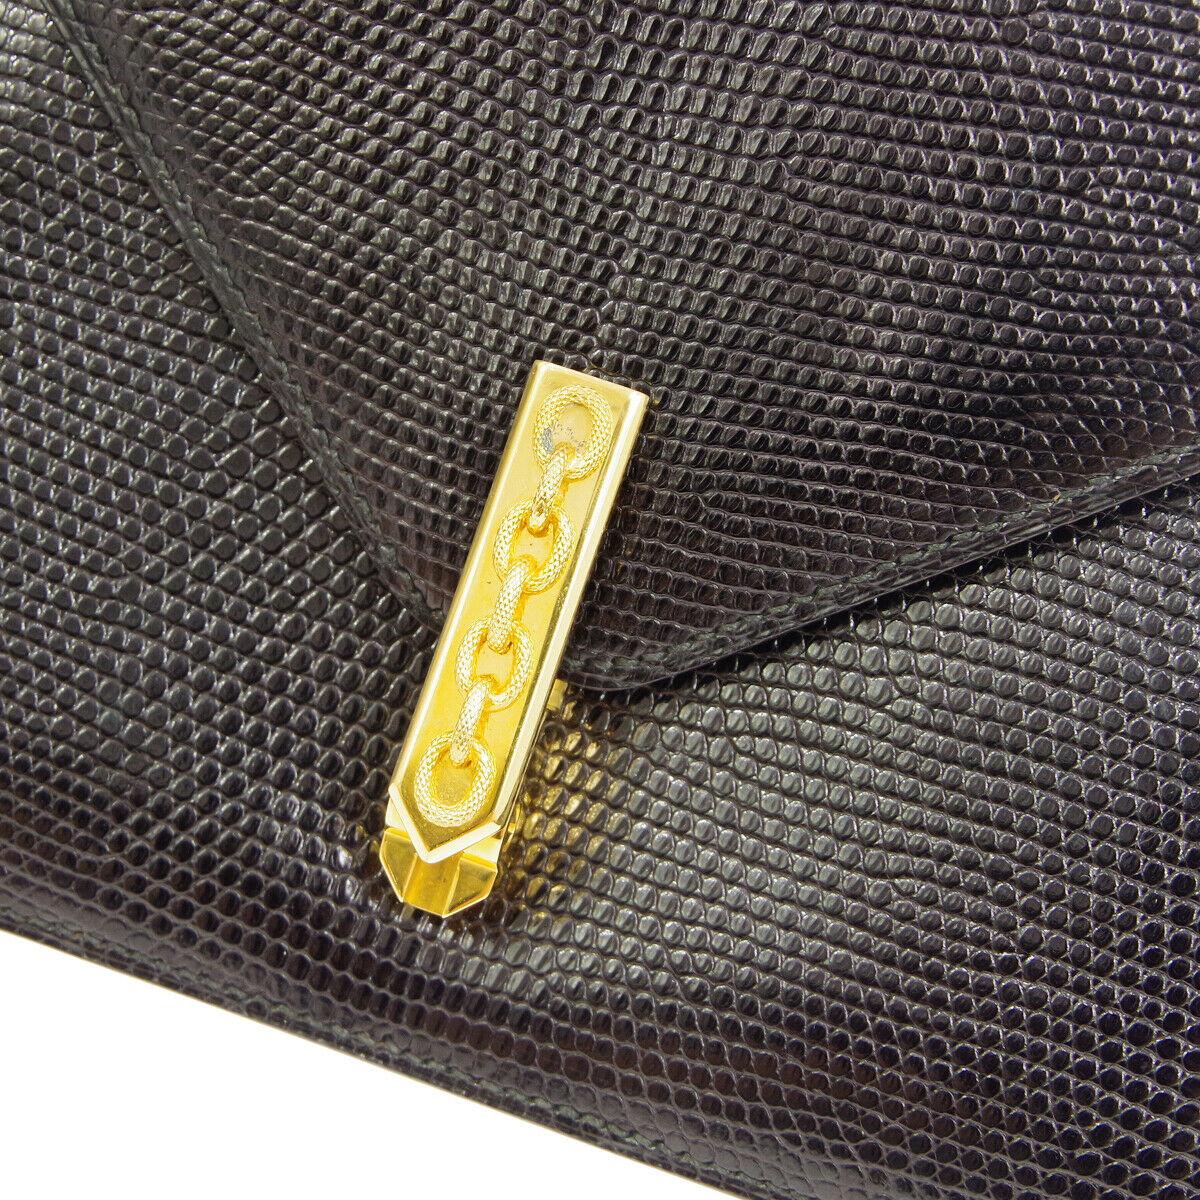 Hermes Black Lizard Exotic Leather Gold Small Evening Clutch Shoulder Flap Bag in Box 

Lizard
Leather
Gold tone hardware
Date code present
Made in France
Shoulder strap drop 16.5